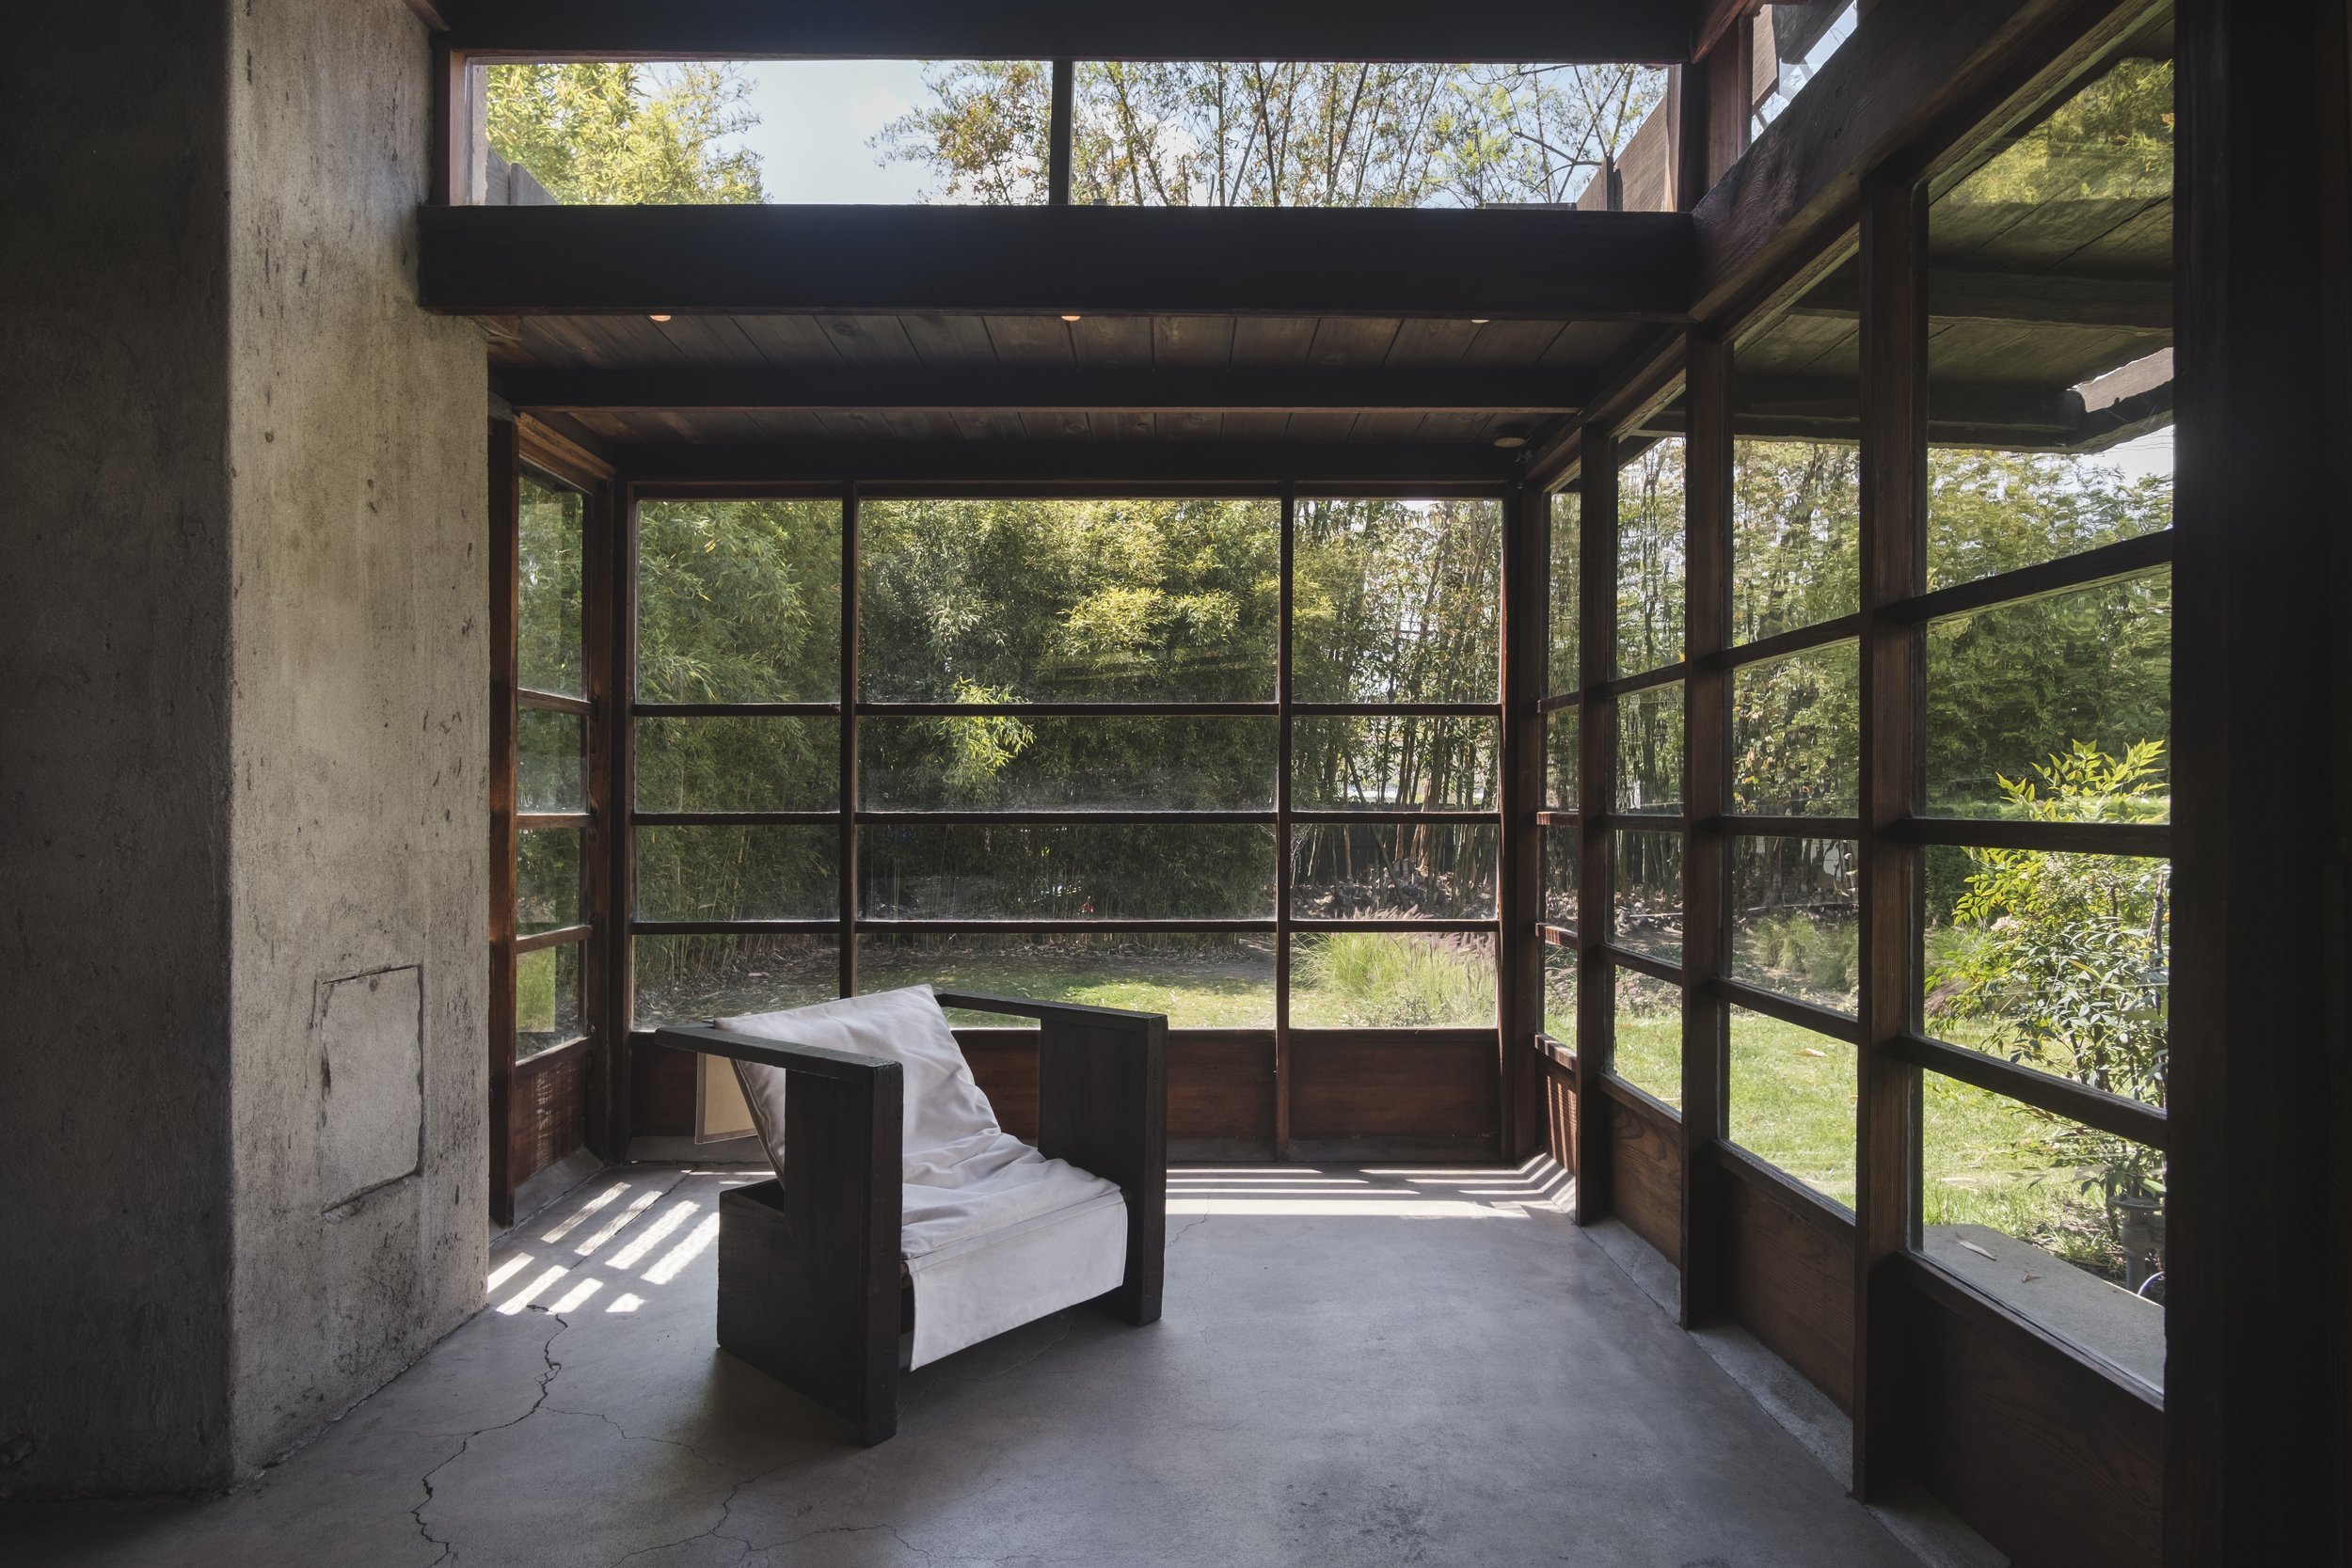 The Schindler House Polished Concrete Floors - Rudolph Schindler